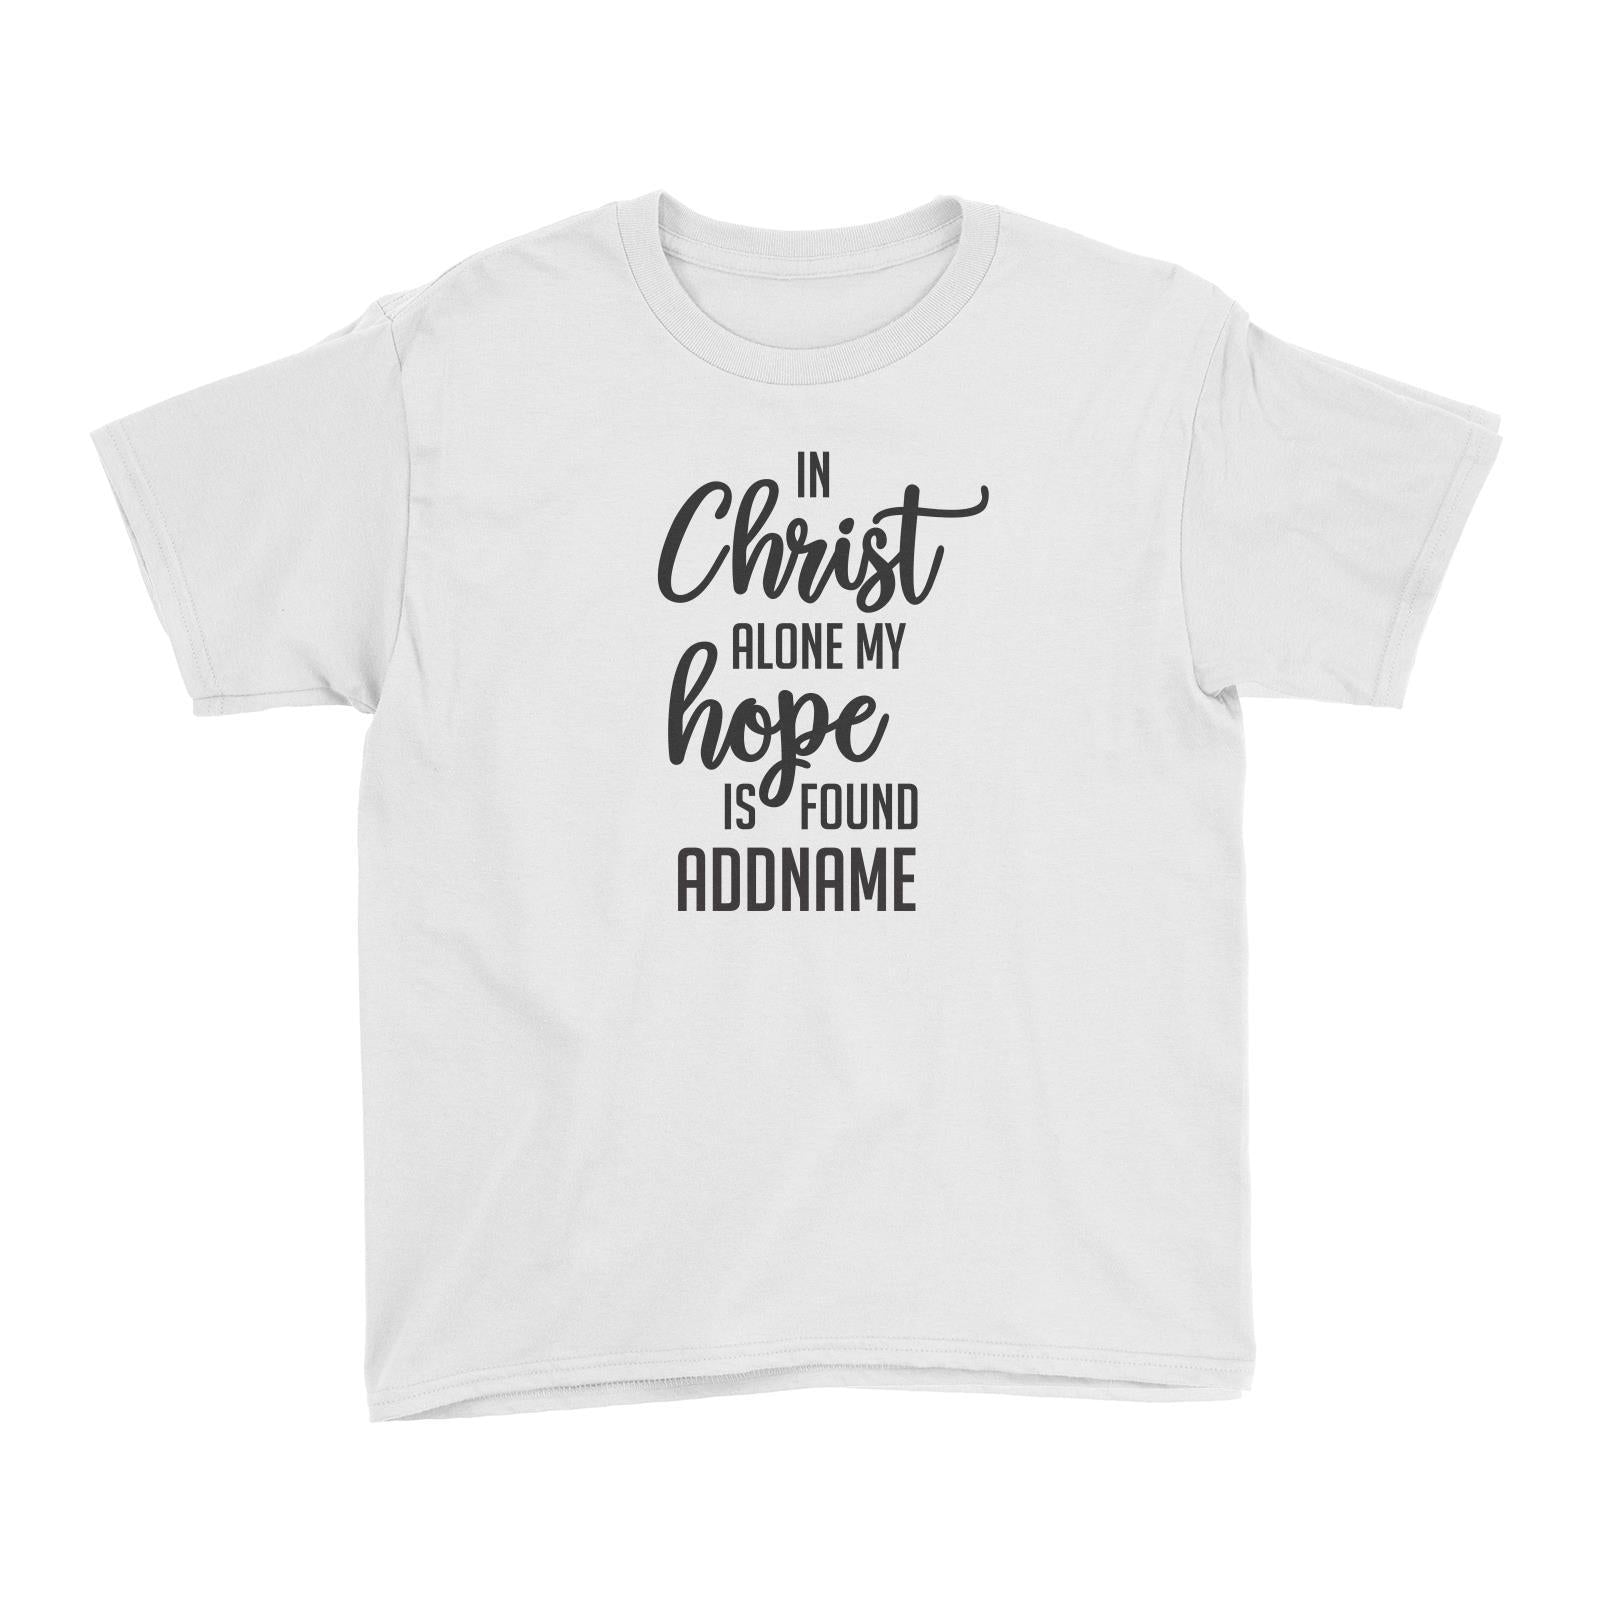 Christian Series In Christ Alone My Hope Is Found Addname Kid's T-Shirt